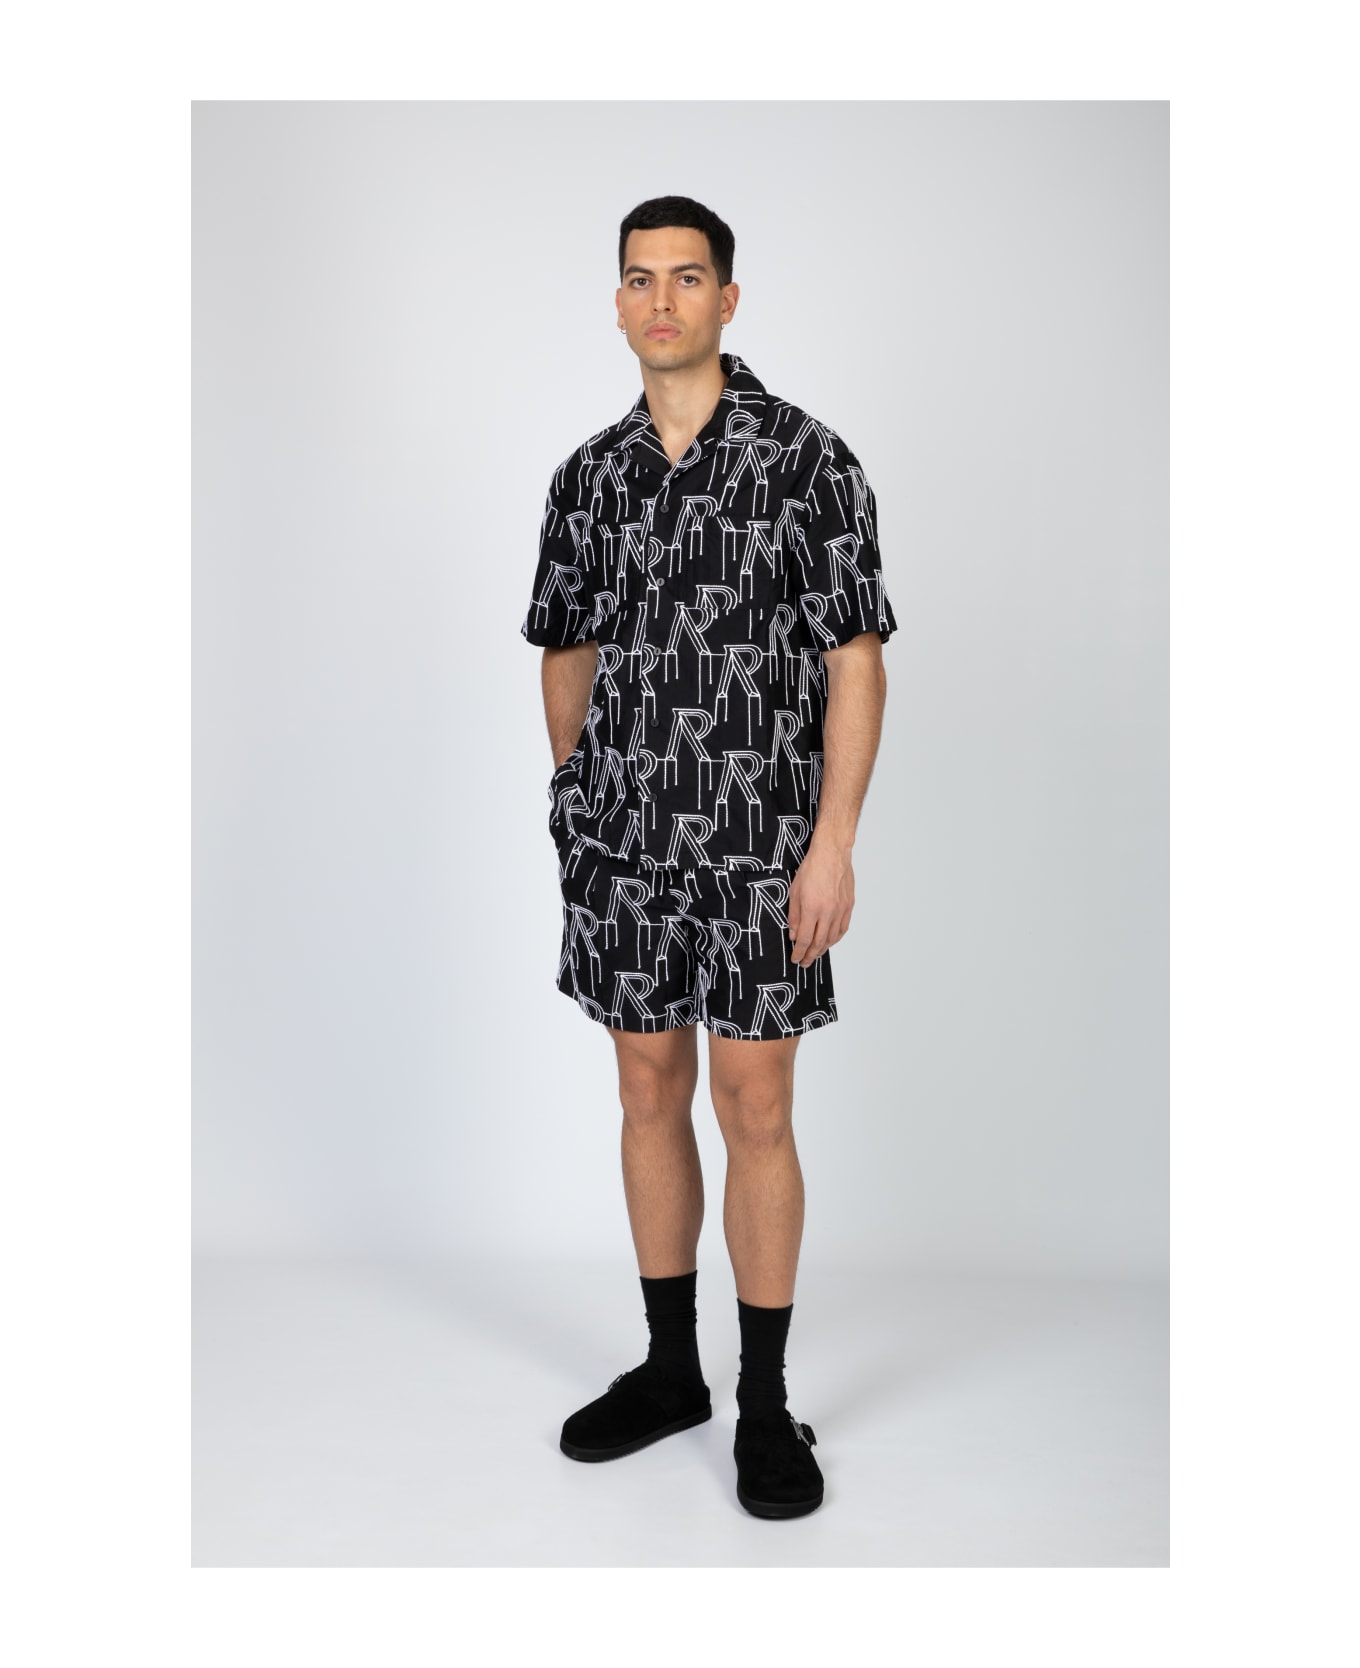 REPRESENT Embrodiered Initial Tailored Short Black cotton pleated short with monogram embroidery - Embroidered Initial Tailored Short - Nero